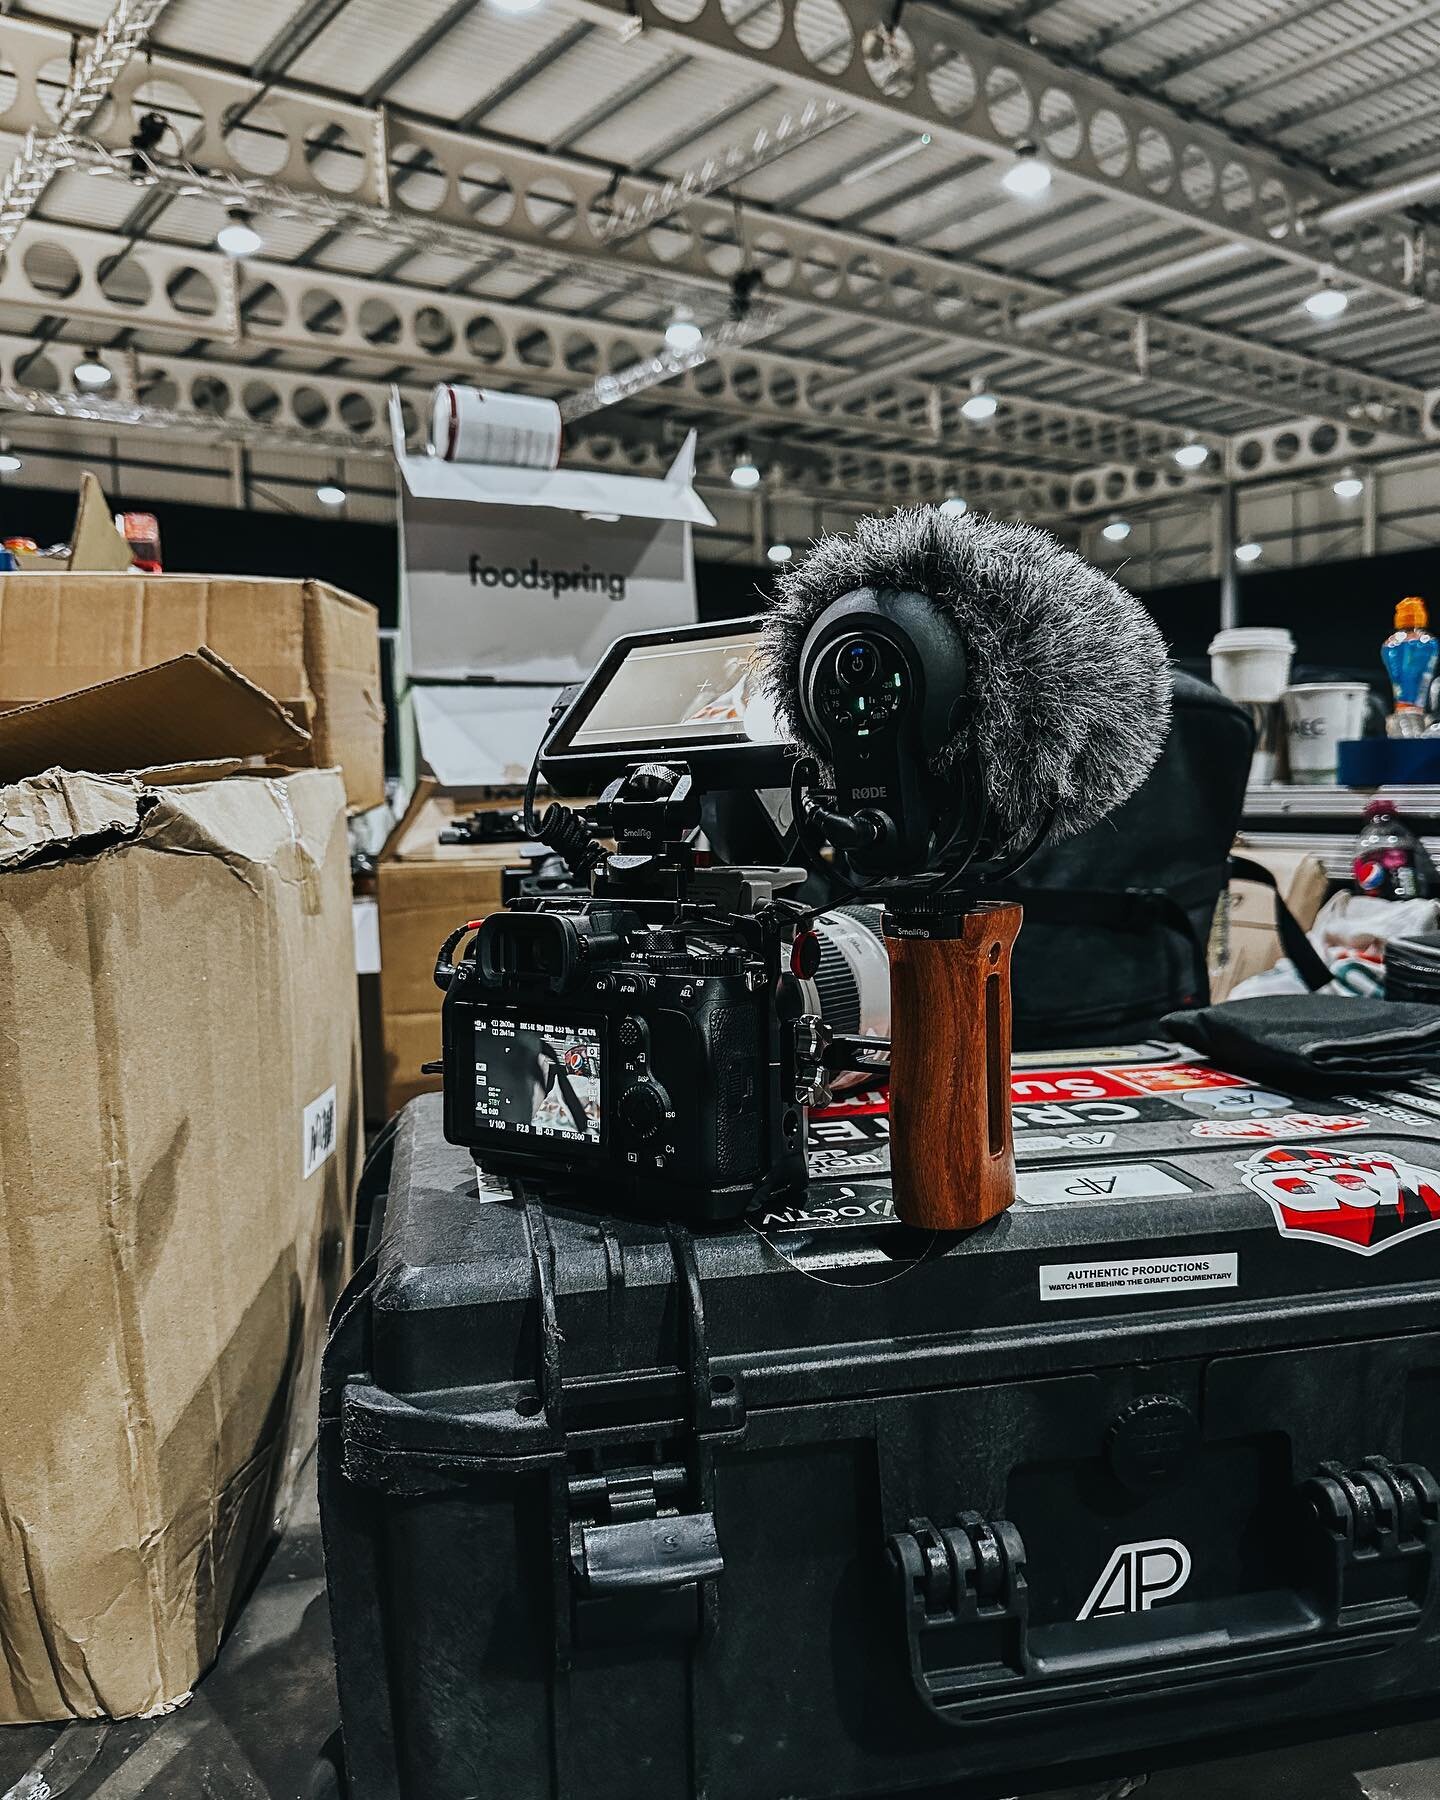 Behind the scenes at @battleformiddleground crossfit competition Ragnar&ouml;k, capturing the event team in full action as they put on these amazing events! 
&bull;
With only a few weeks to go, We&rsquo;re rigged and ready for the filming of the next